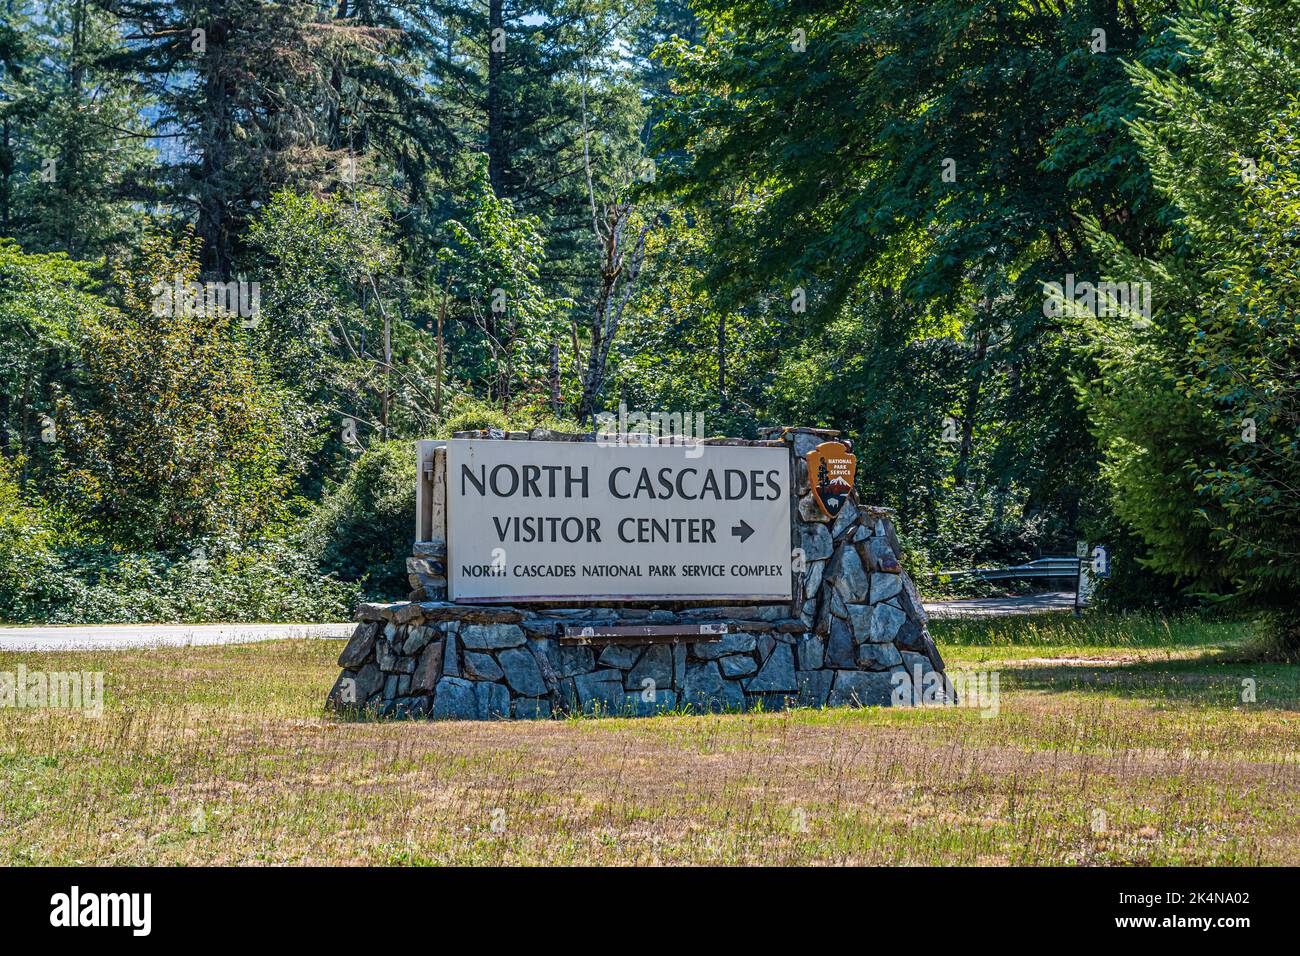 North Cascades NP, WA, USA - August 18, 2021: A welcoming signboard at the entry point of preserve park Stock Photo